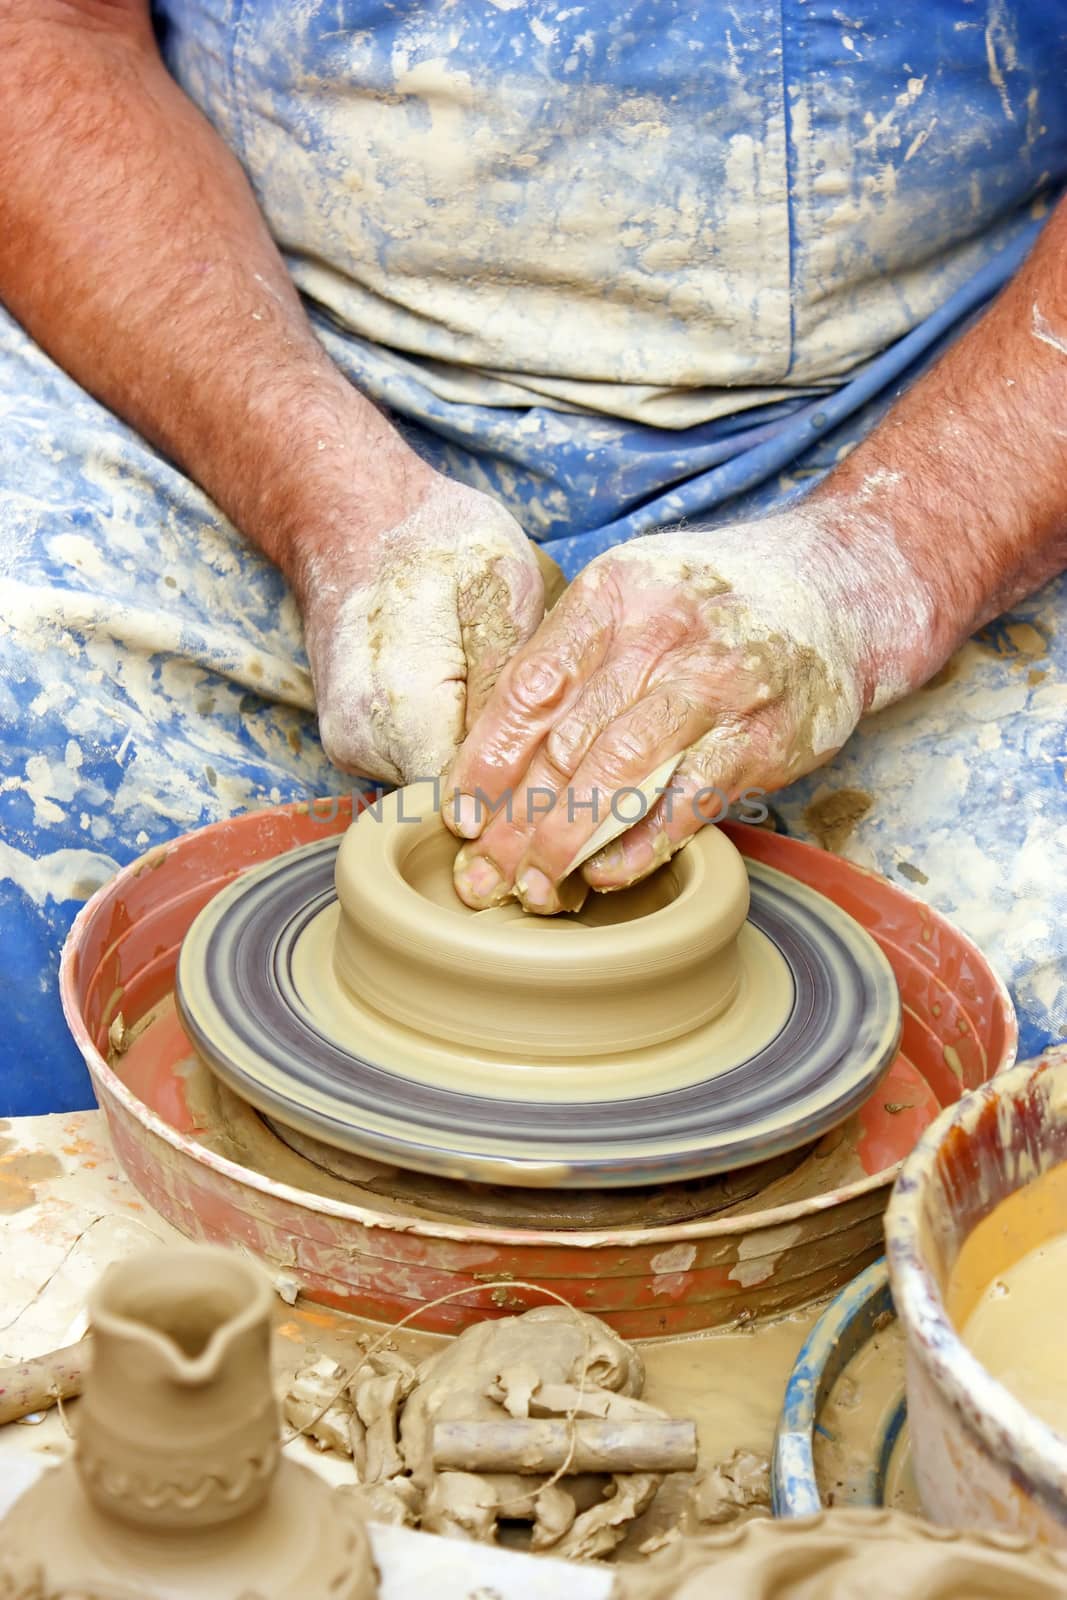 Close up of potter's hands making clay pot